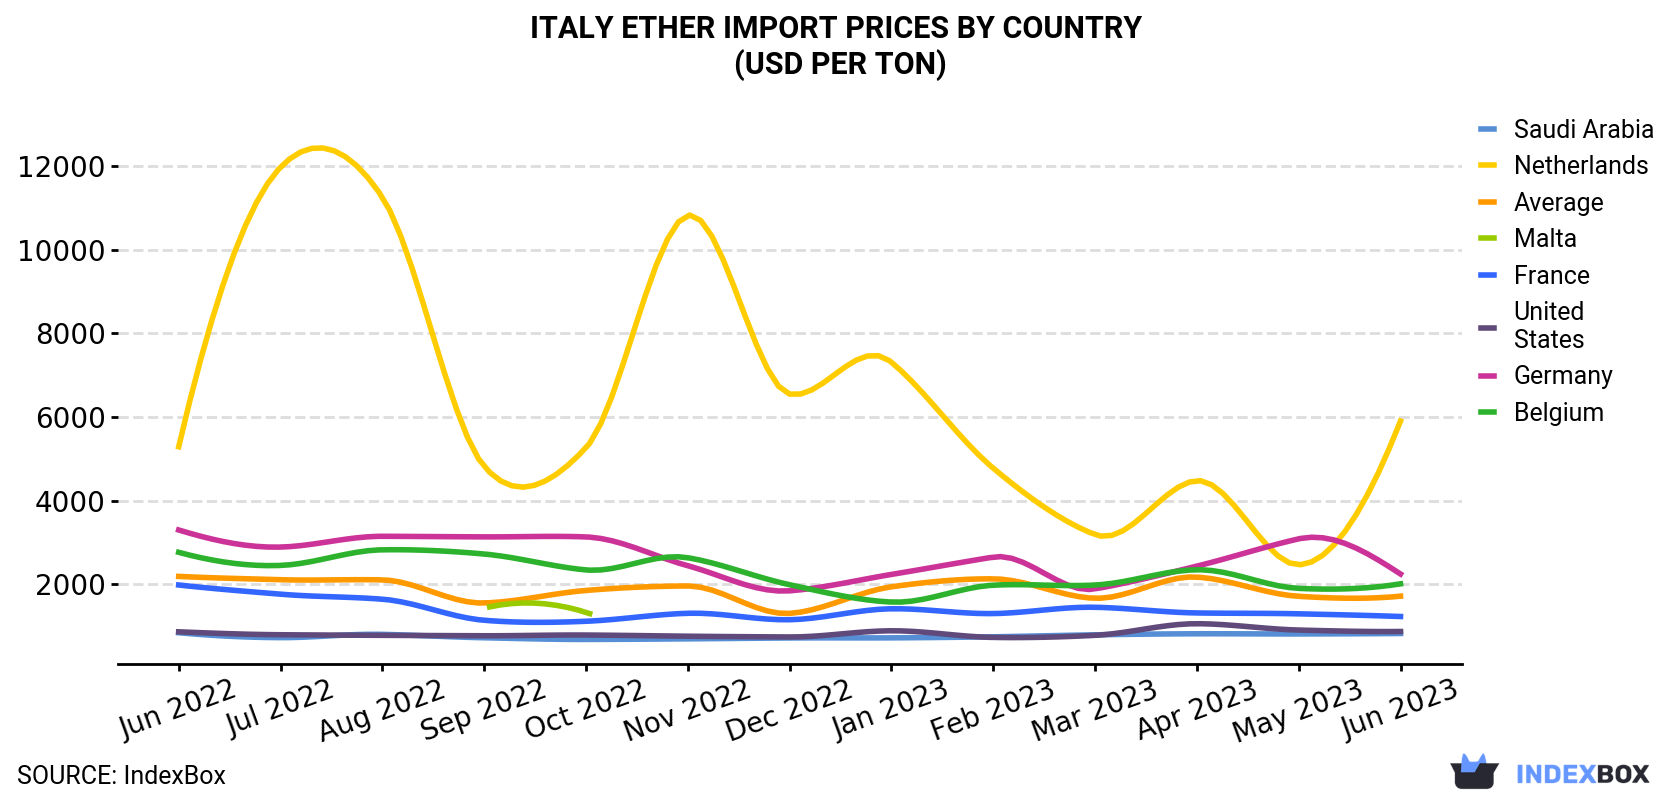 Italy Ether Import Prices By Country (USD Per Ton)